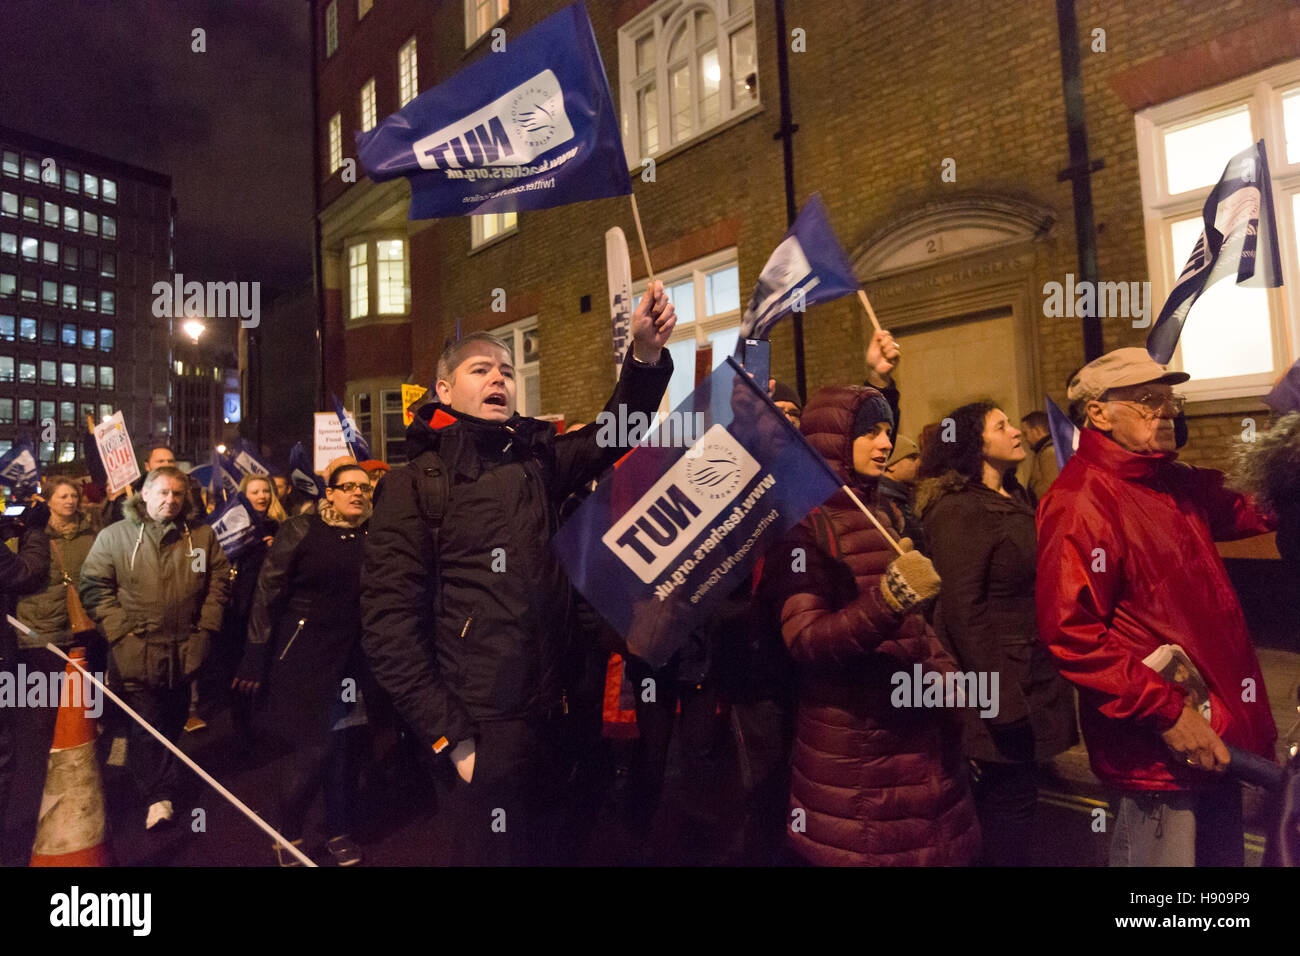 London, UK. 17th Nov 2016. Protesters march past the Department for Education. Teachers from the National Union of Teachers (NUT), school governors and support staff stage a protest rally against government cuts in education funding outside Downing Street in Westminster before marching to the Department for Education this evening. Protesters are demanding and increase in education funding in the upcoming budget to ensure that every child gets the best education. Credit:  Vickie Flores/Alamy Live News Stock Photo